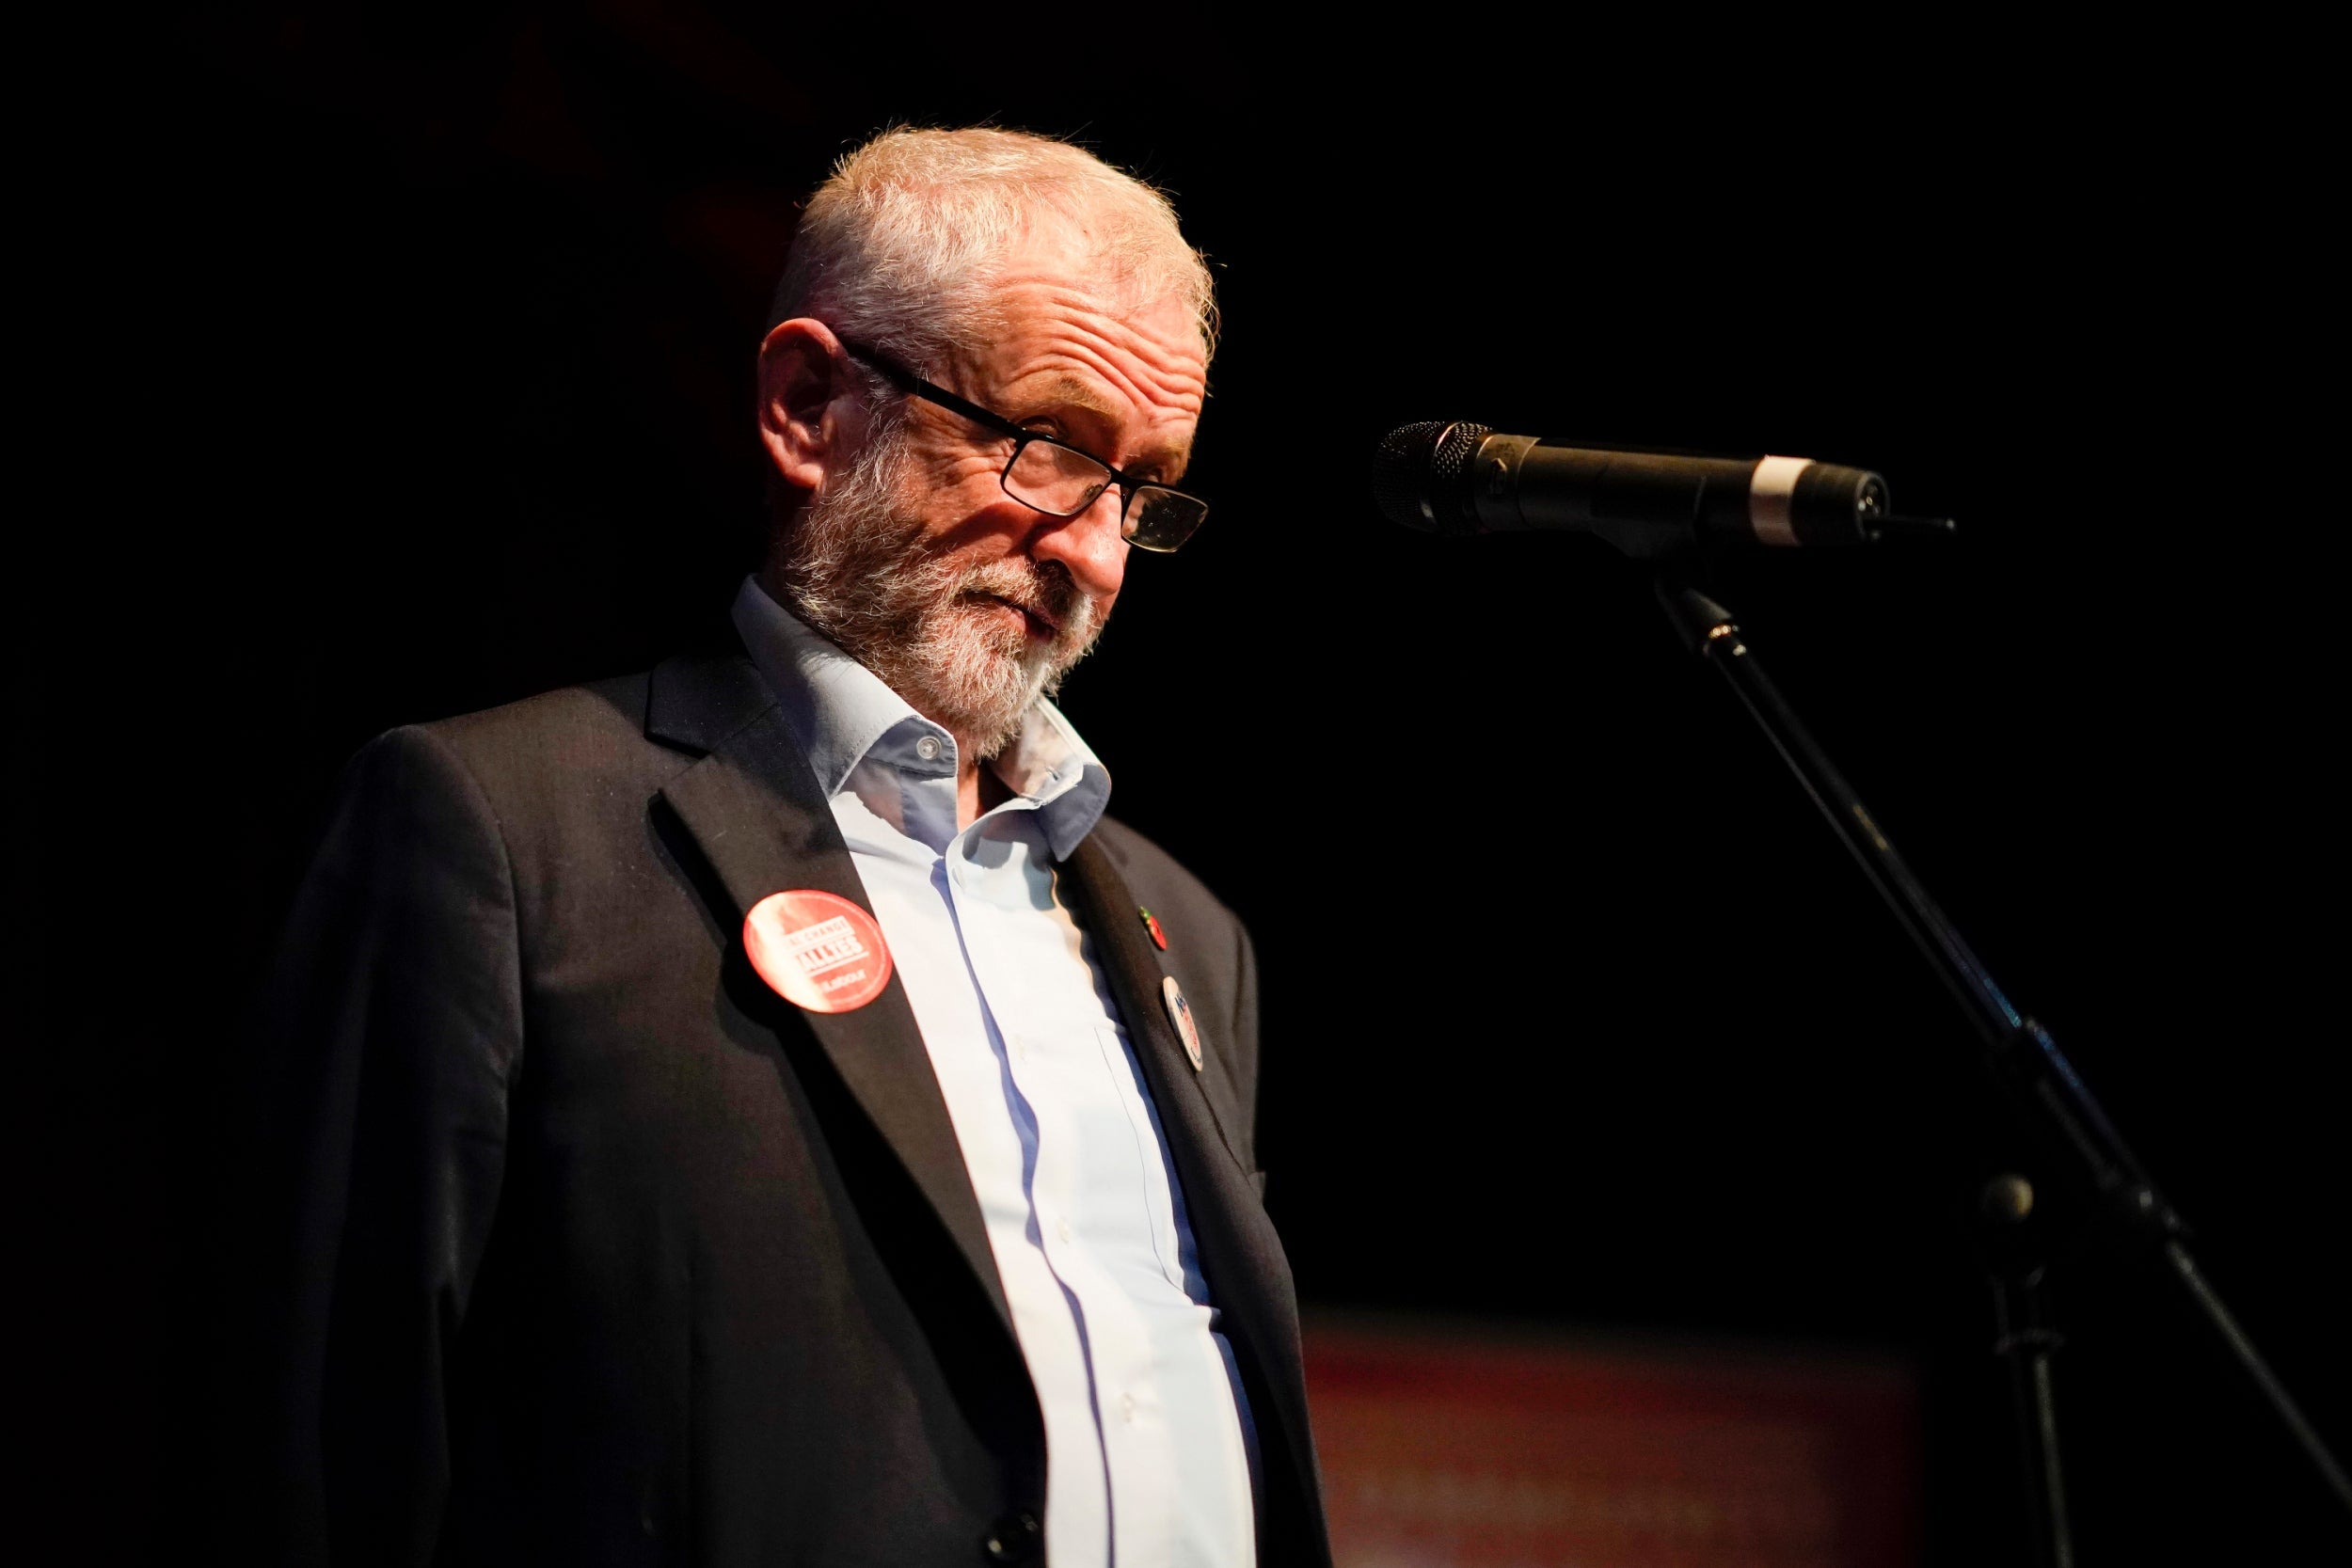 Jeremy Corbyn gives a speech to supporters at Darwen Library Theatre on Thursday